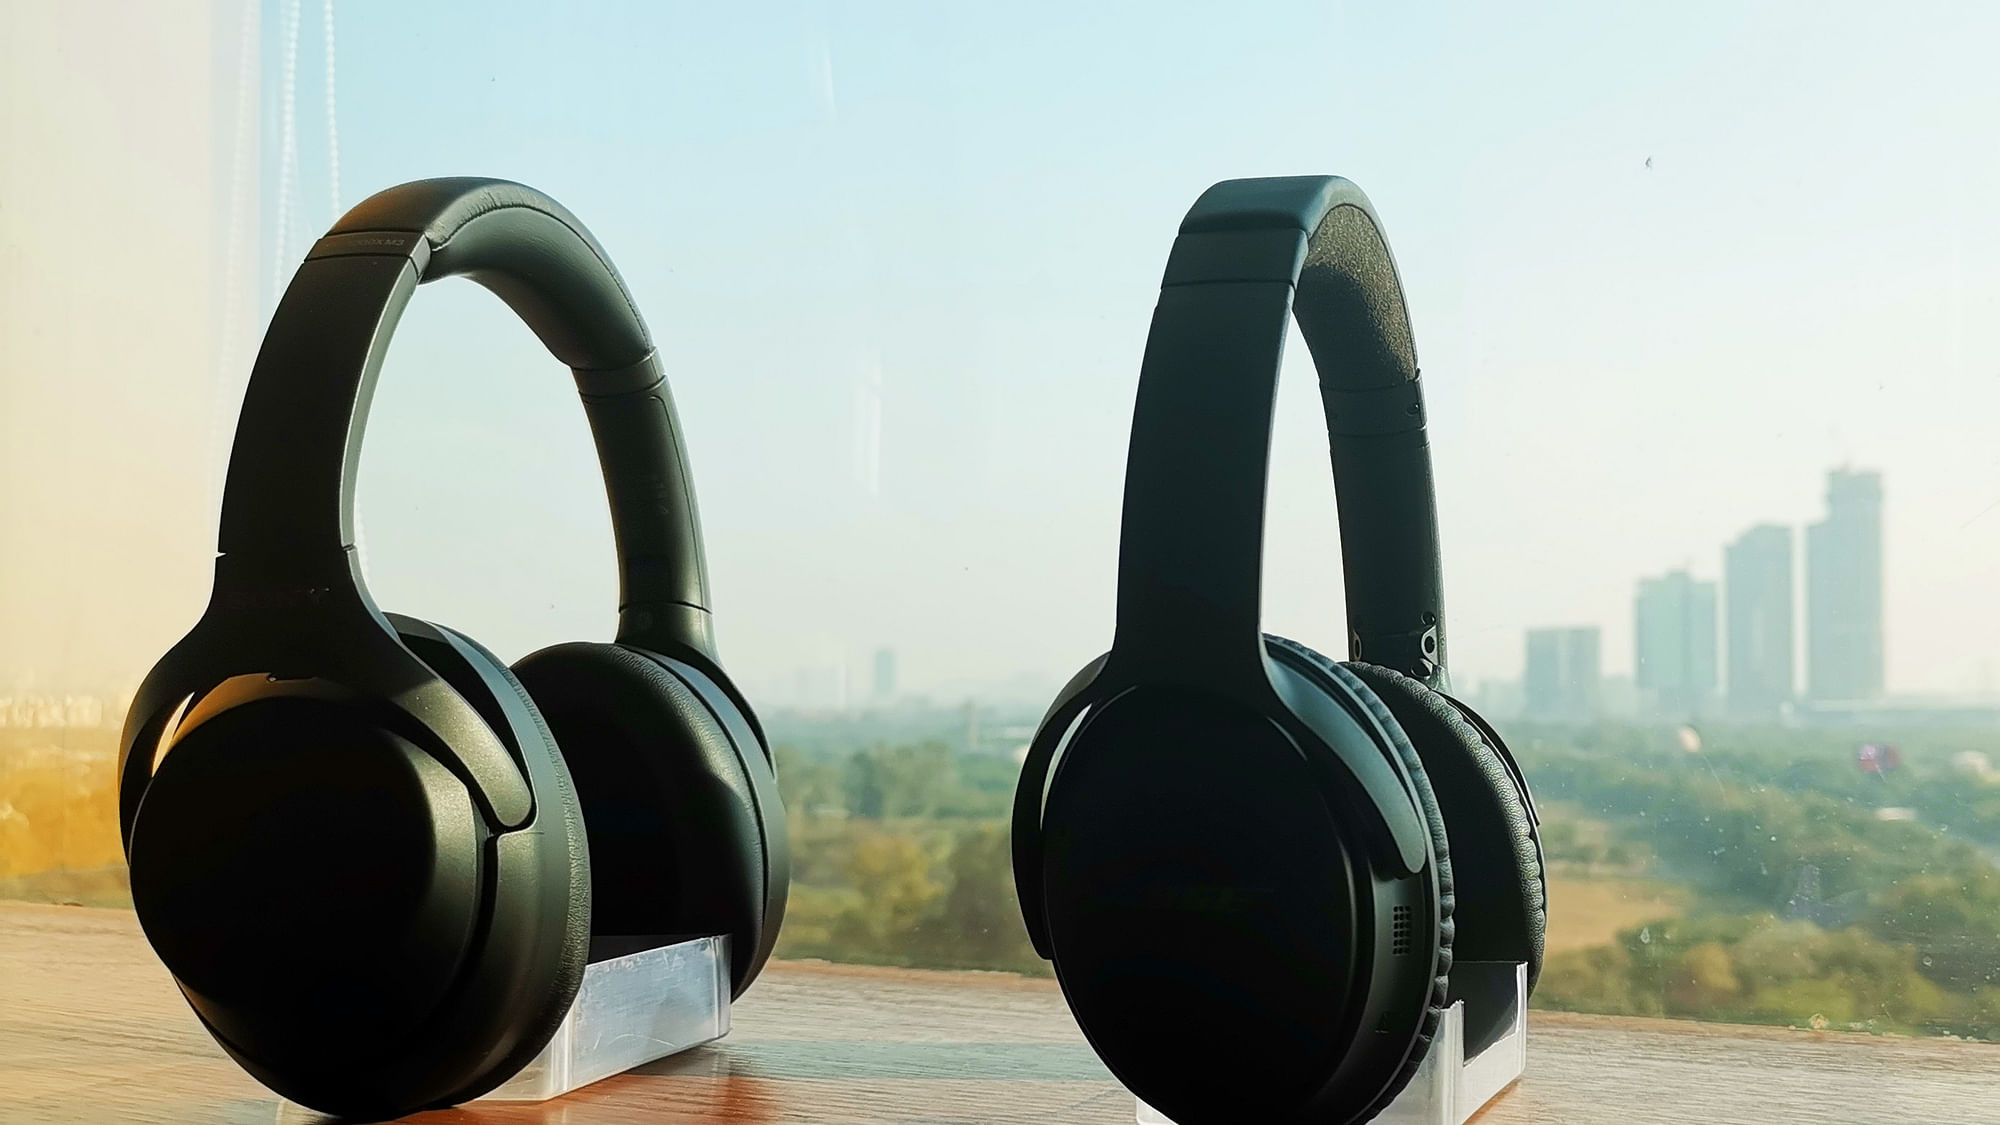 The Sony WH-1000MX3 (left) &amp; Bose QC35 II (right).